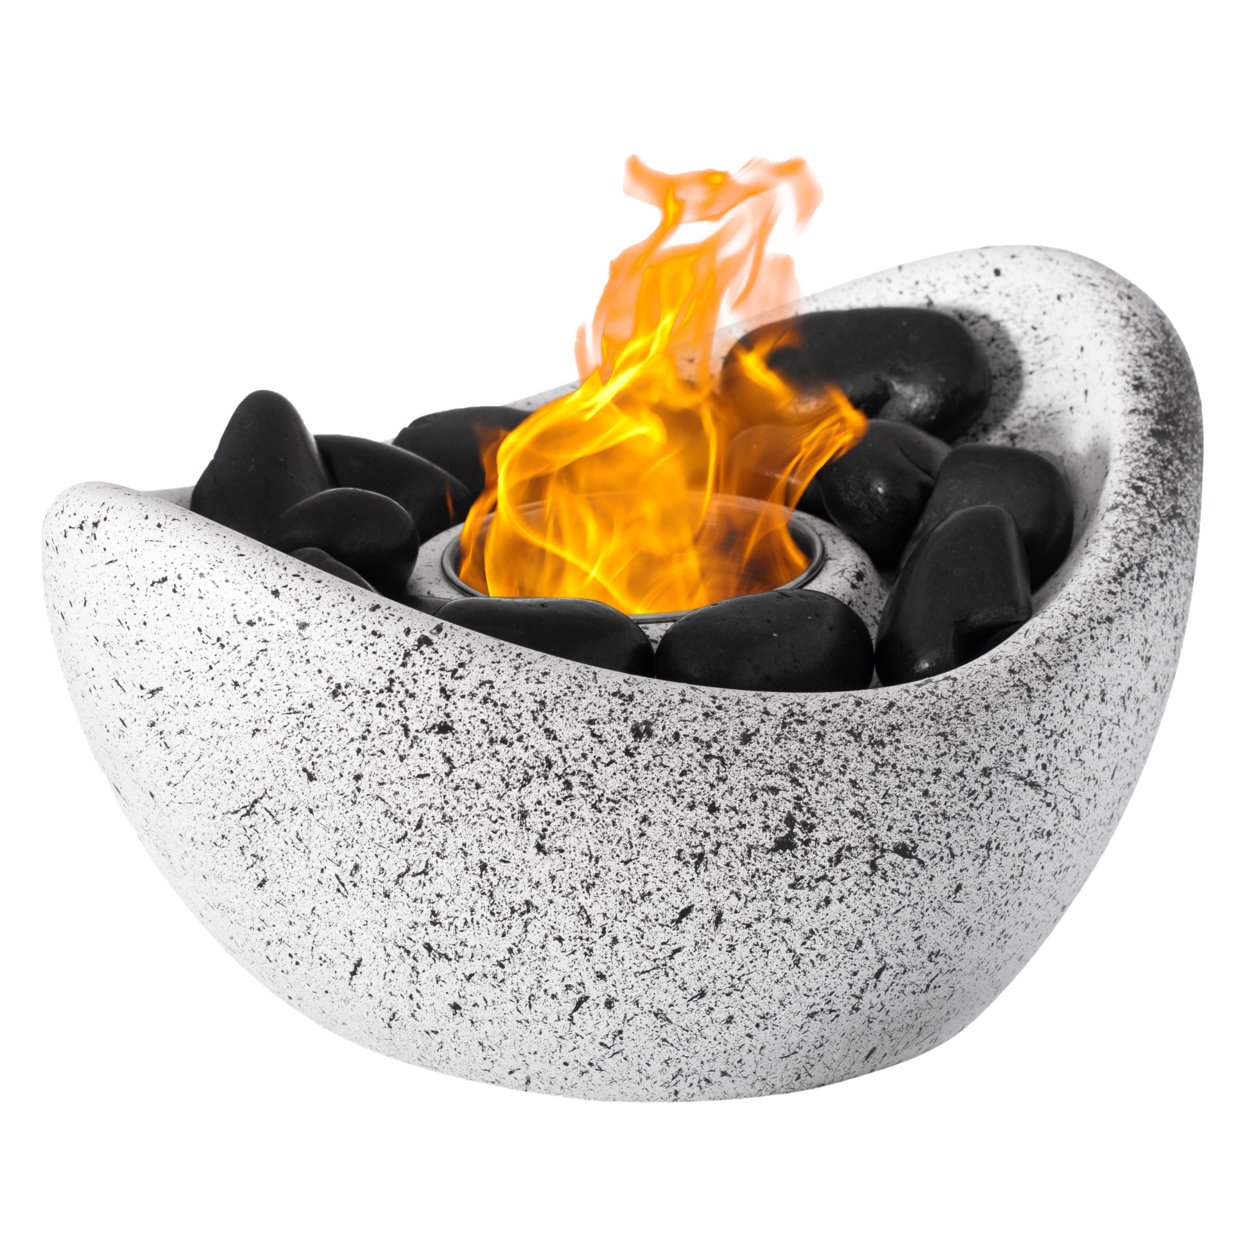 Mini Tabletop Fire Pit Rubbing Alcohol Fireplace Indoor Outdoor Portable Fire Concrete Bowl Pot Fireplace - Bowl